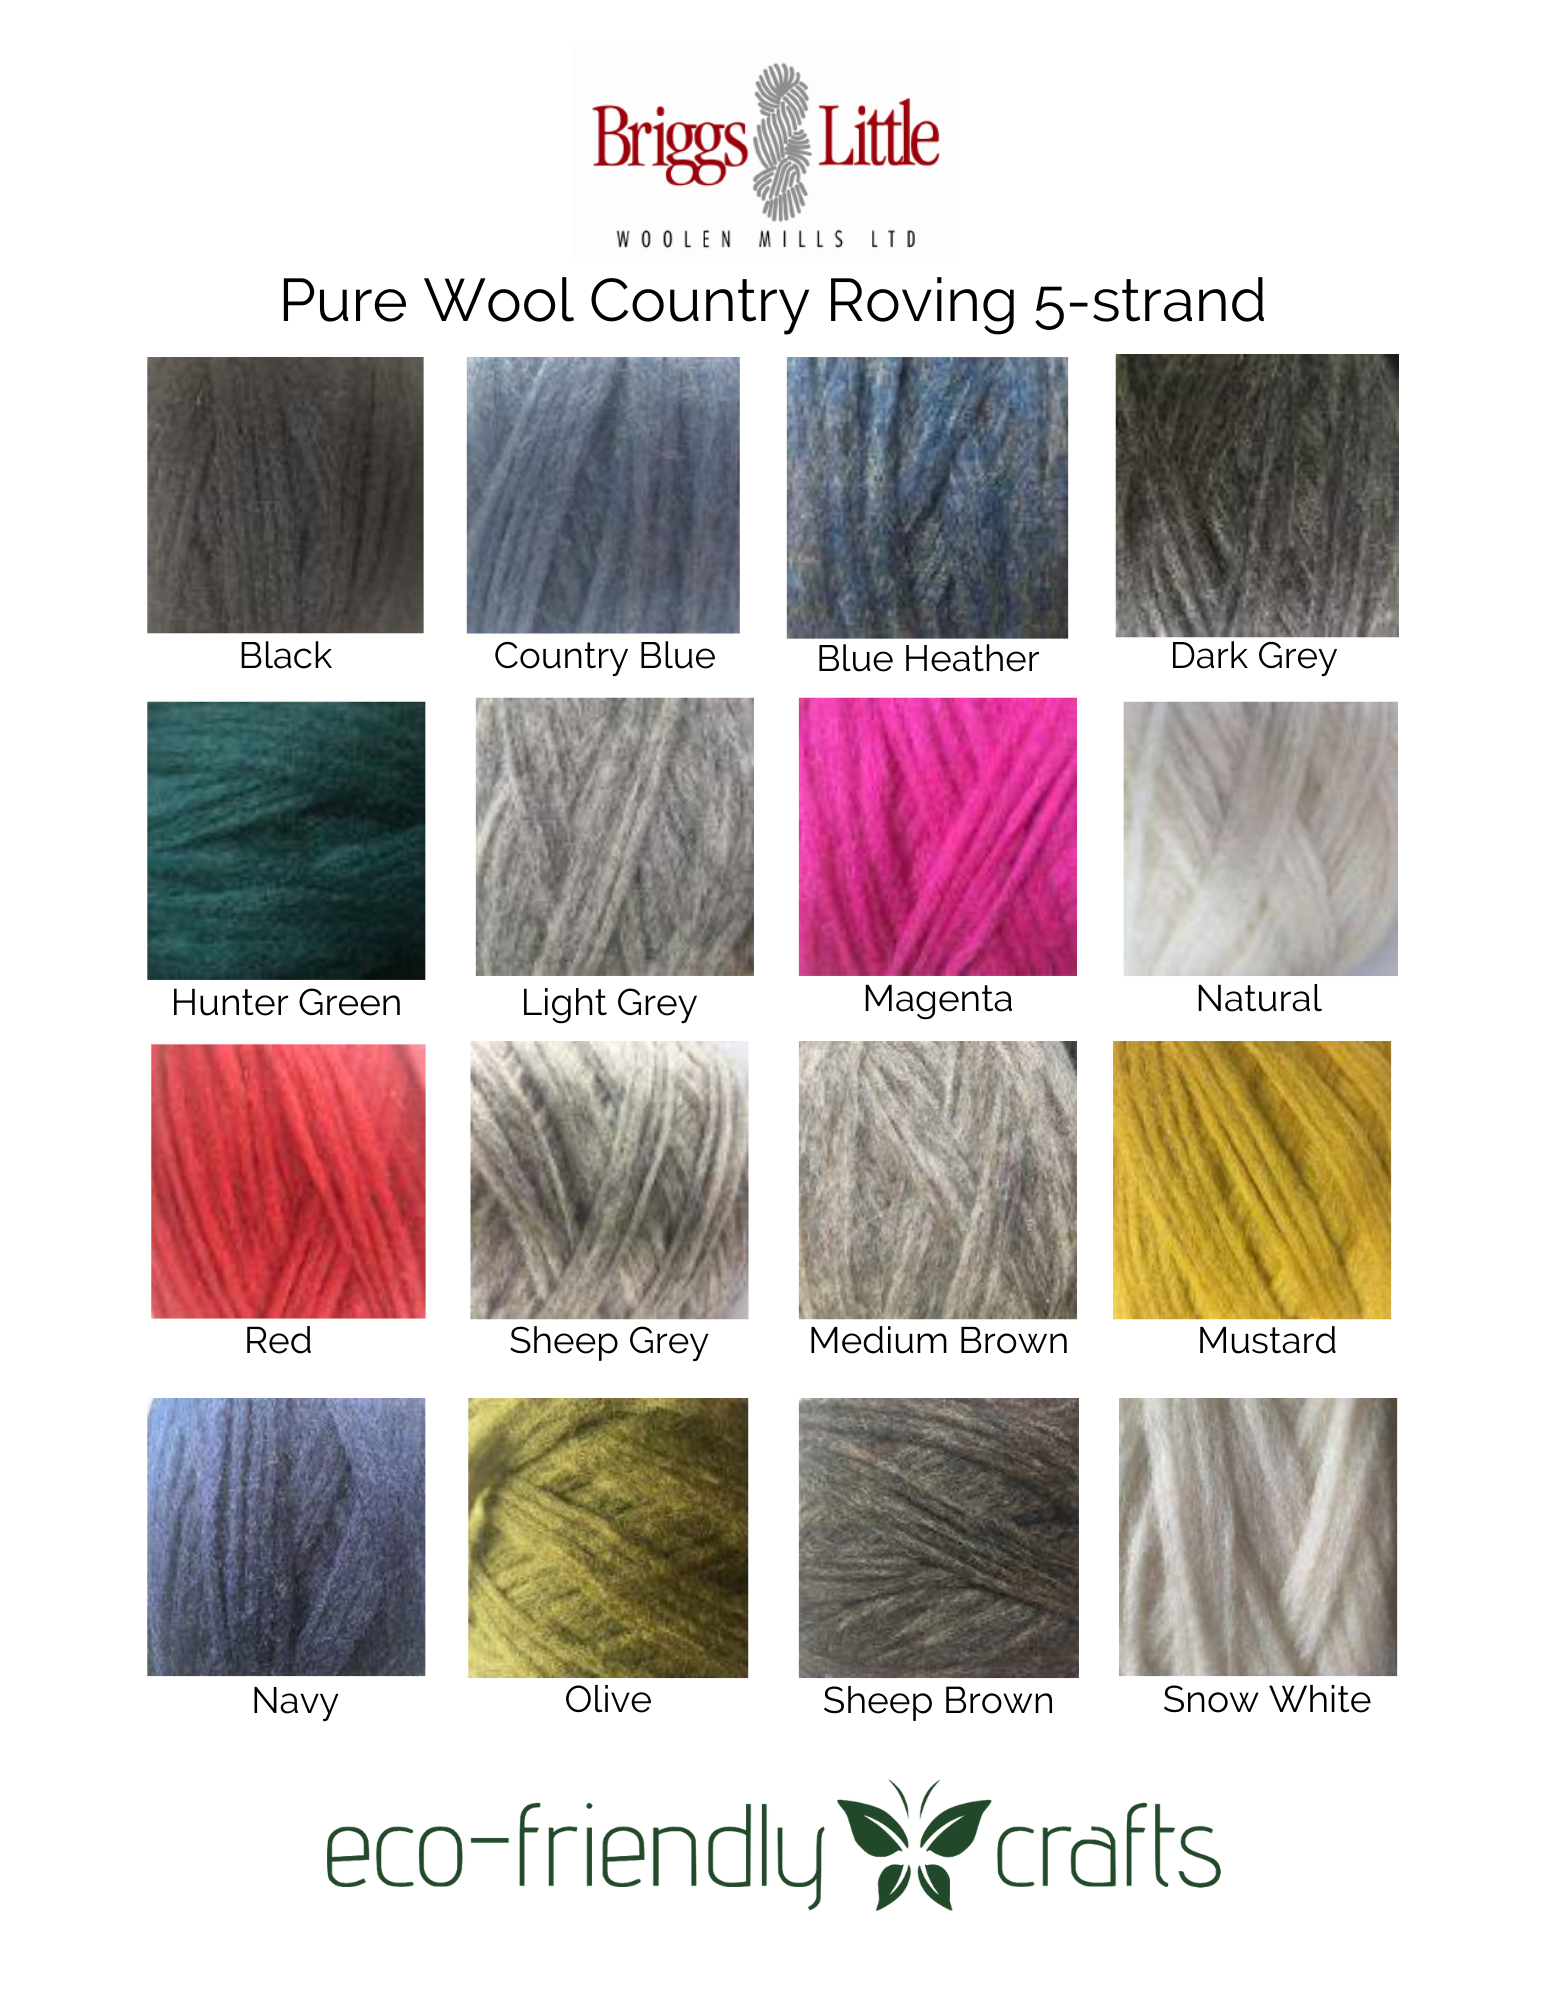 Copy of Briggs and Little Pure Wool Country Roving - 1 oz - For Knitting, Felting, and Oxford Punch Needle